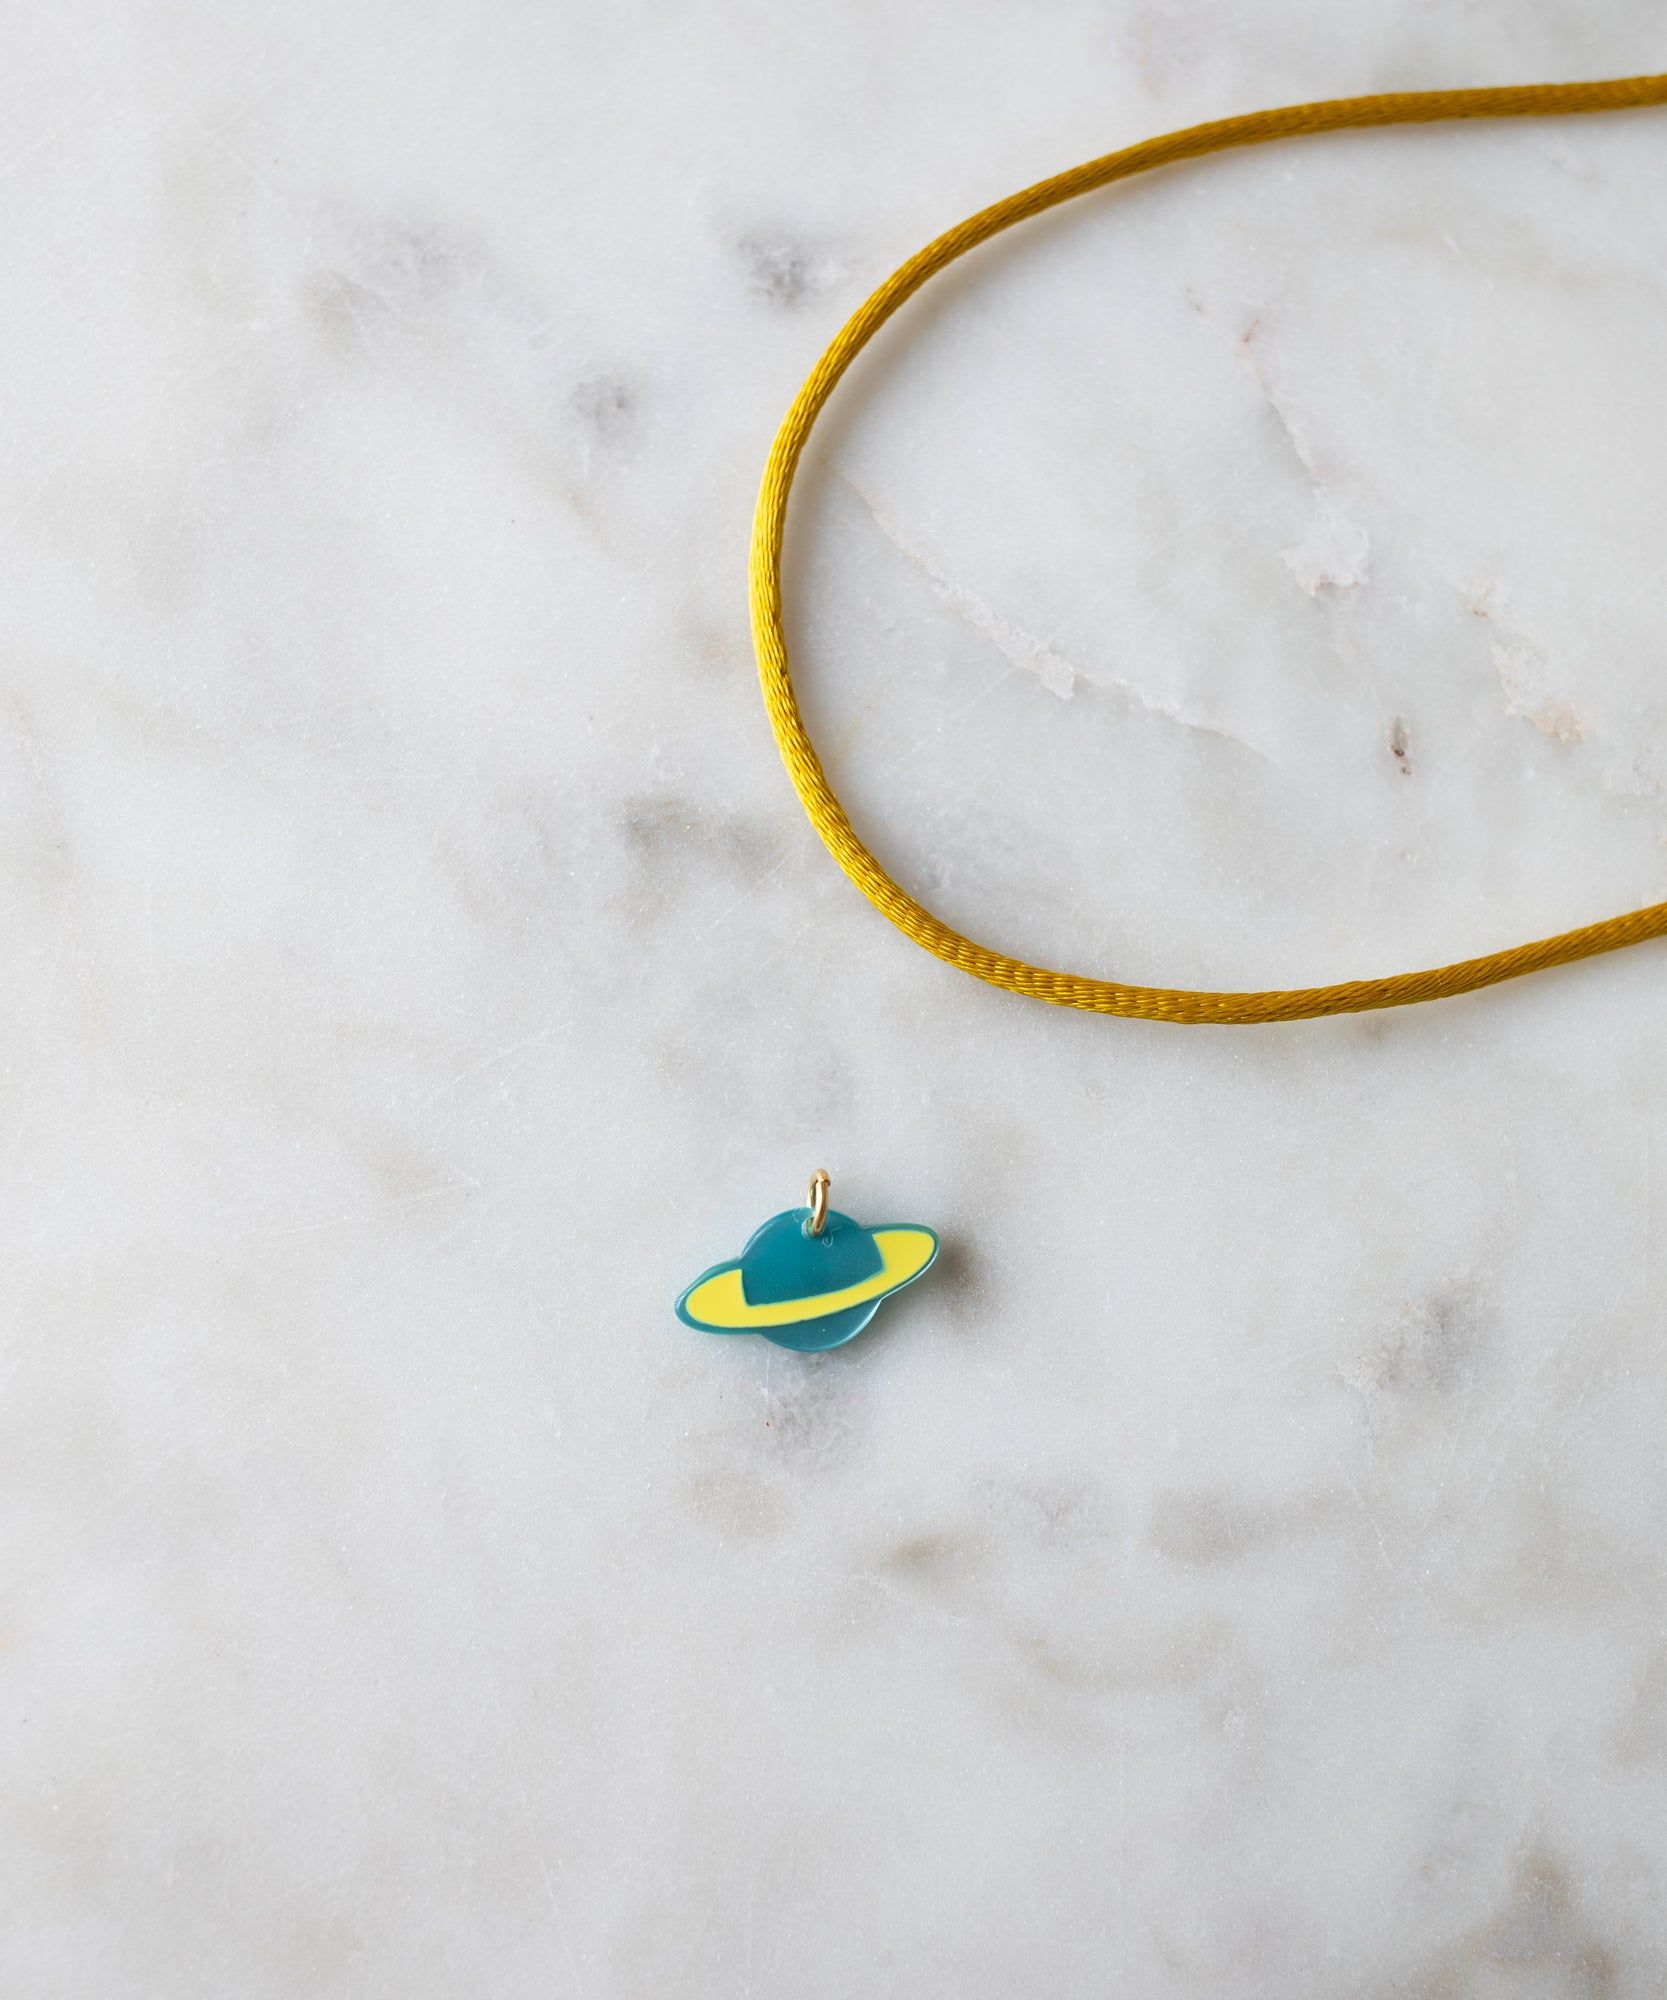 A Venus Charm pendant from WALD World on a yellow cord lying on a marble surface.